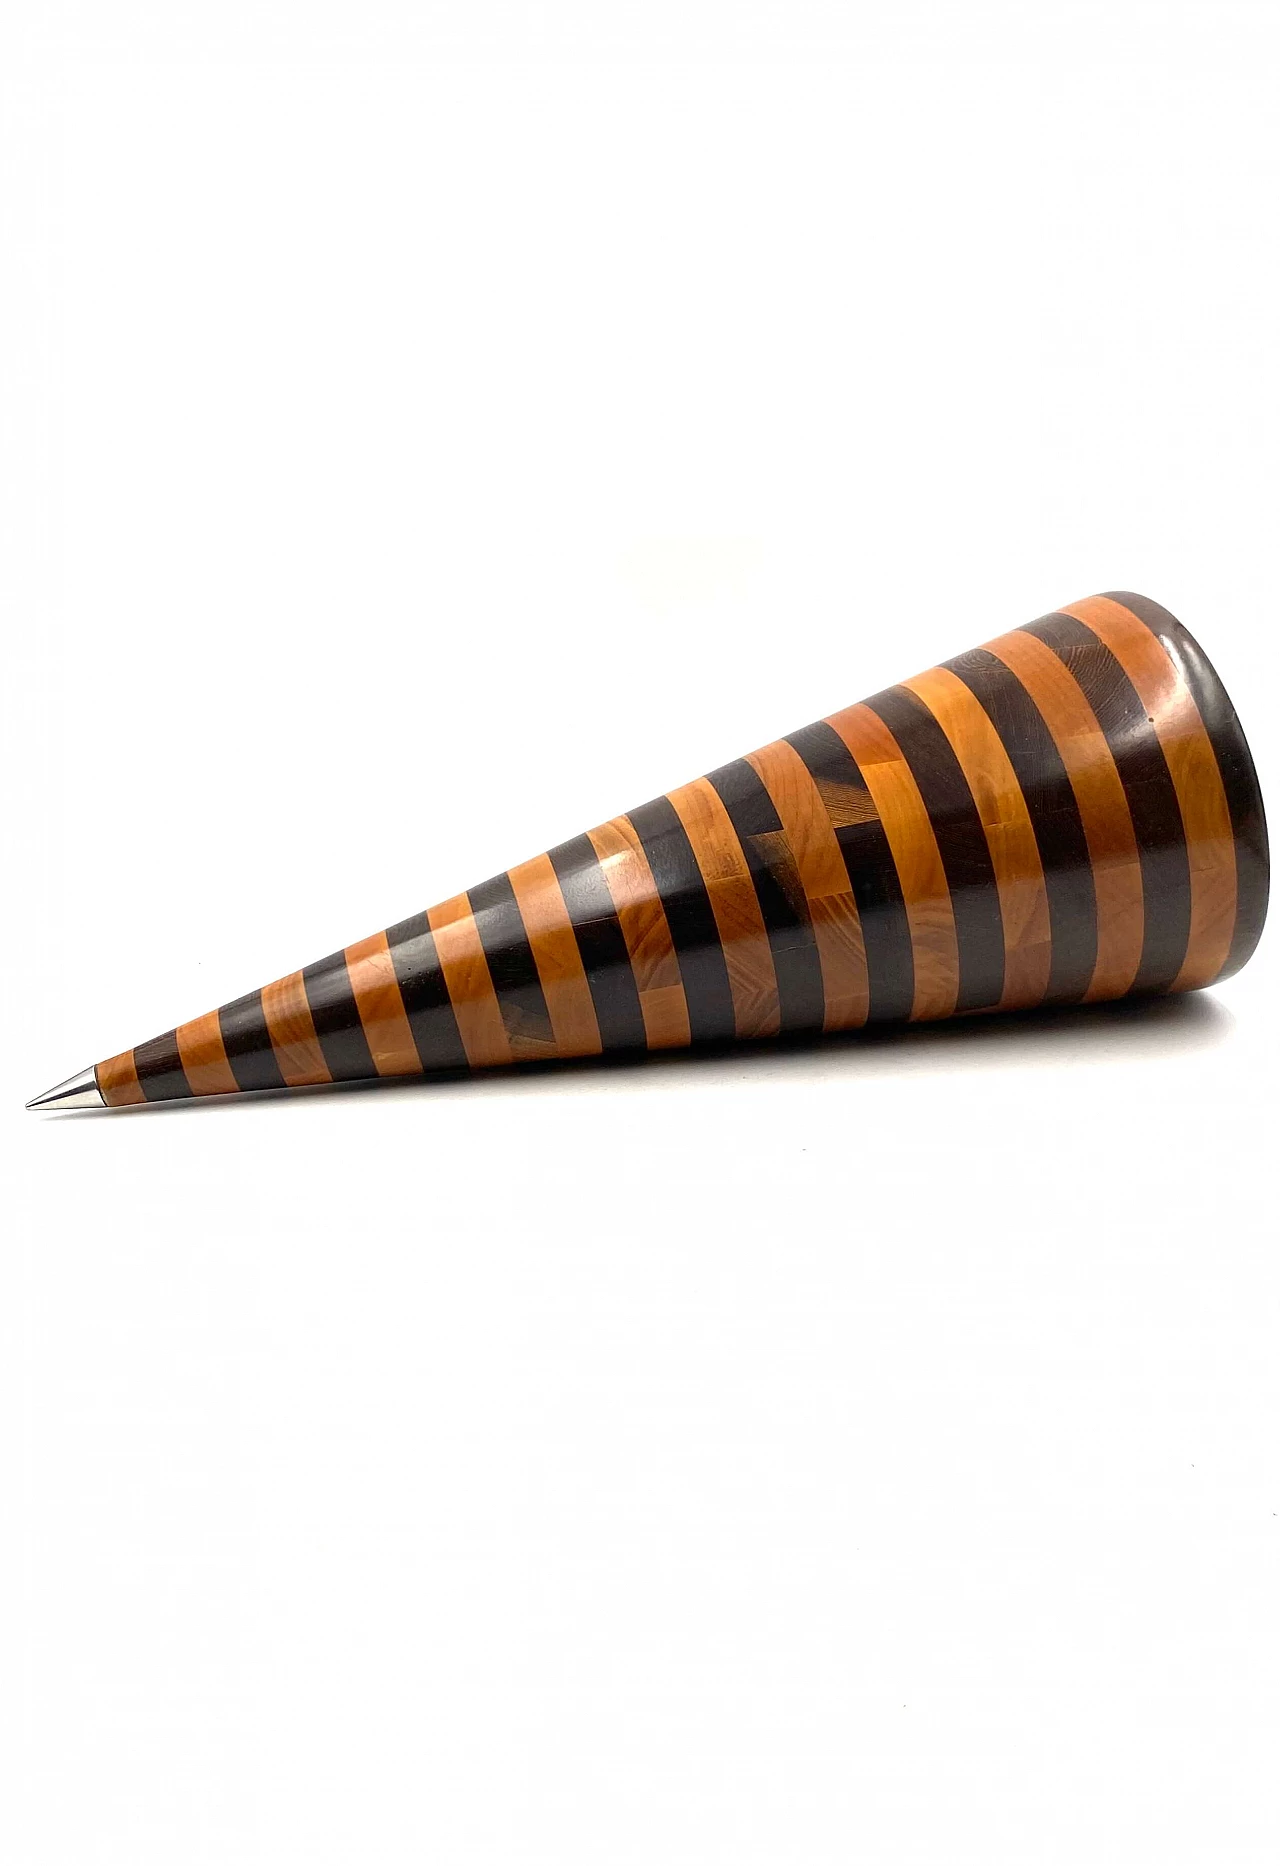 Conical solid wood sculpture by Salmistraro, 1970s 12